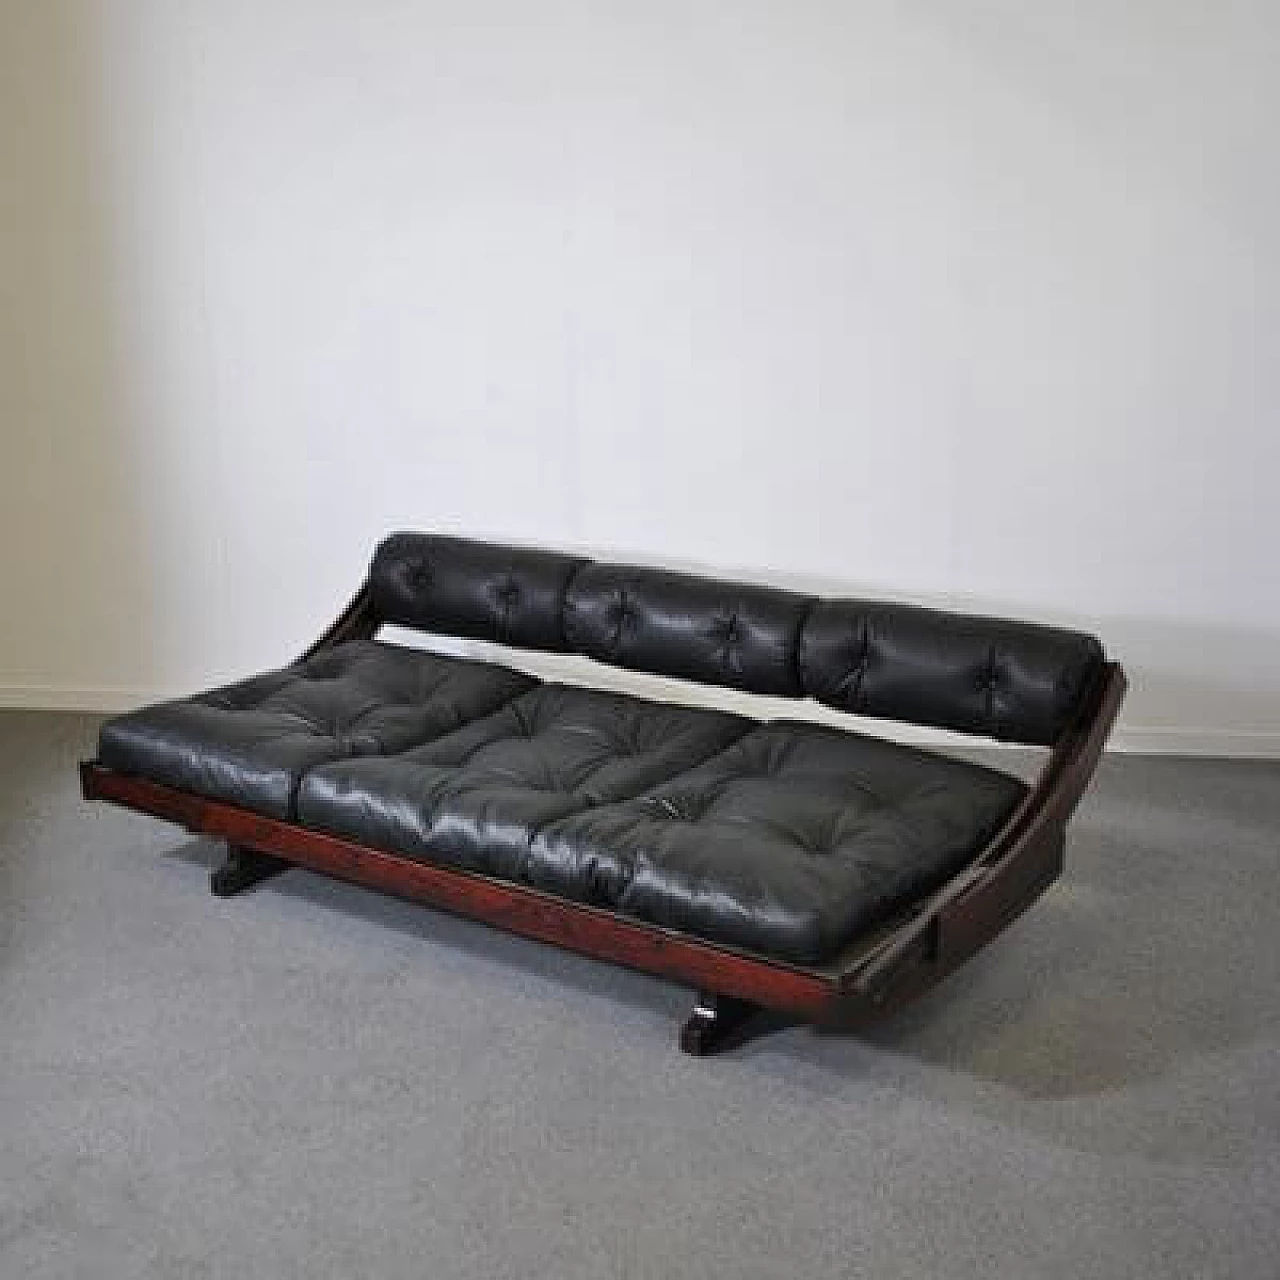 GS195 wooden and leather sofa by Gianni Songia for Luigi Sormani, 1970s 1412264